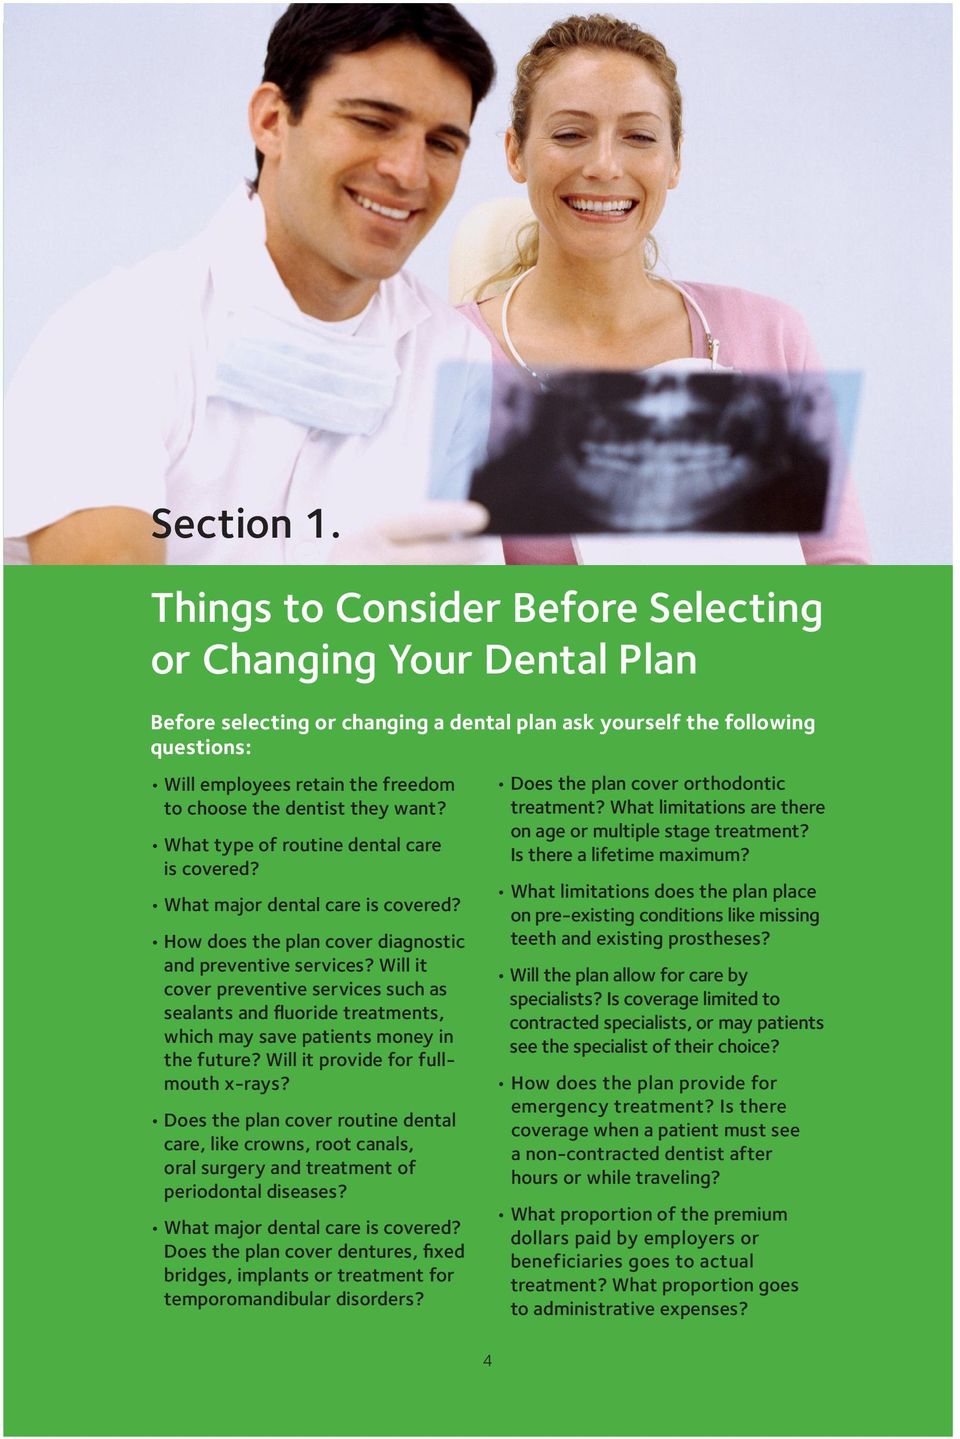 dentist they want? What type of routine dental care is covered? What major dental care is covered? How does the plan cover diagnostic and preventive services?